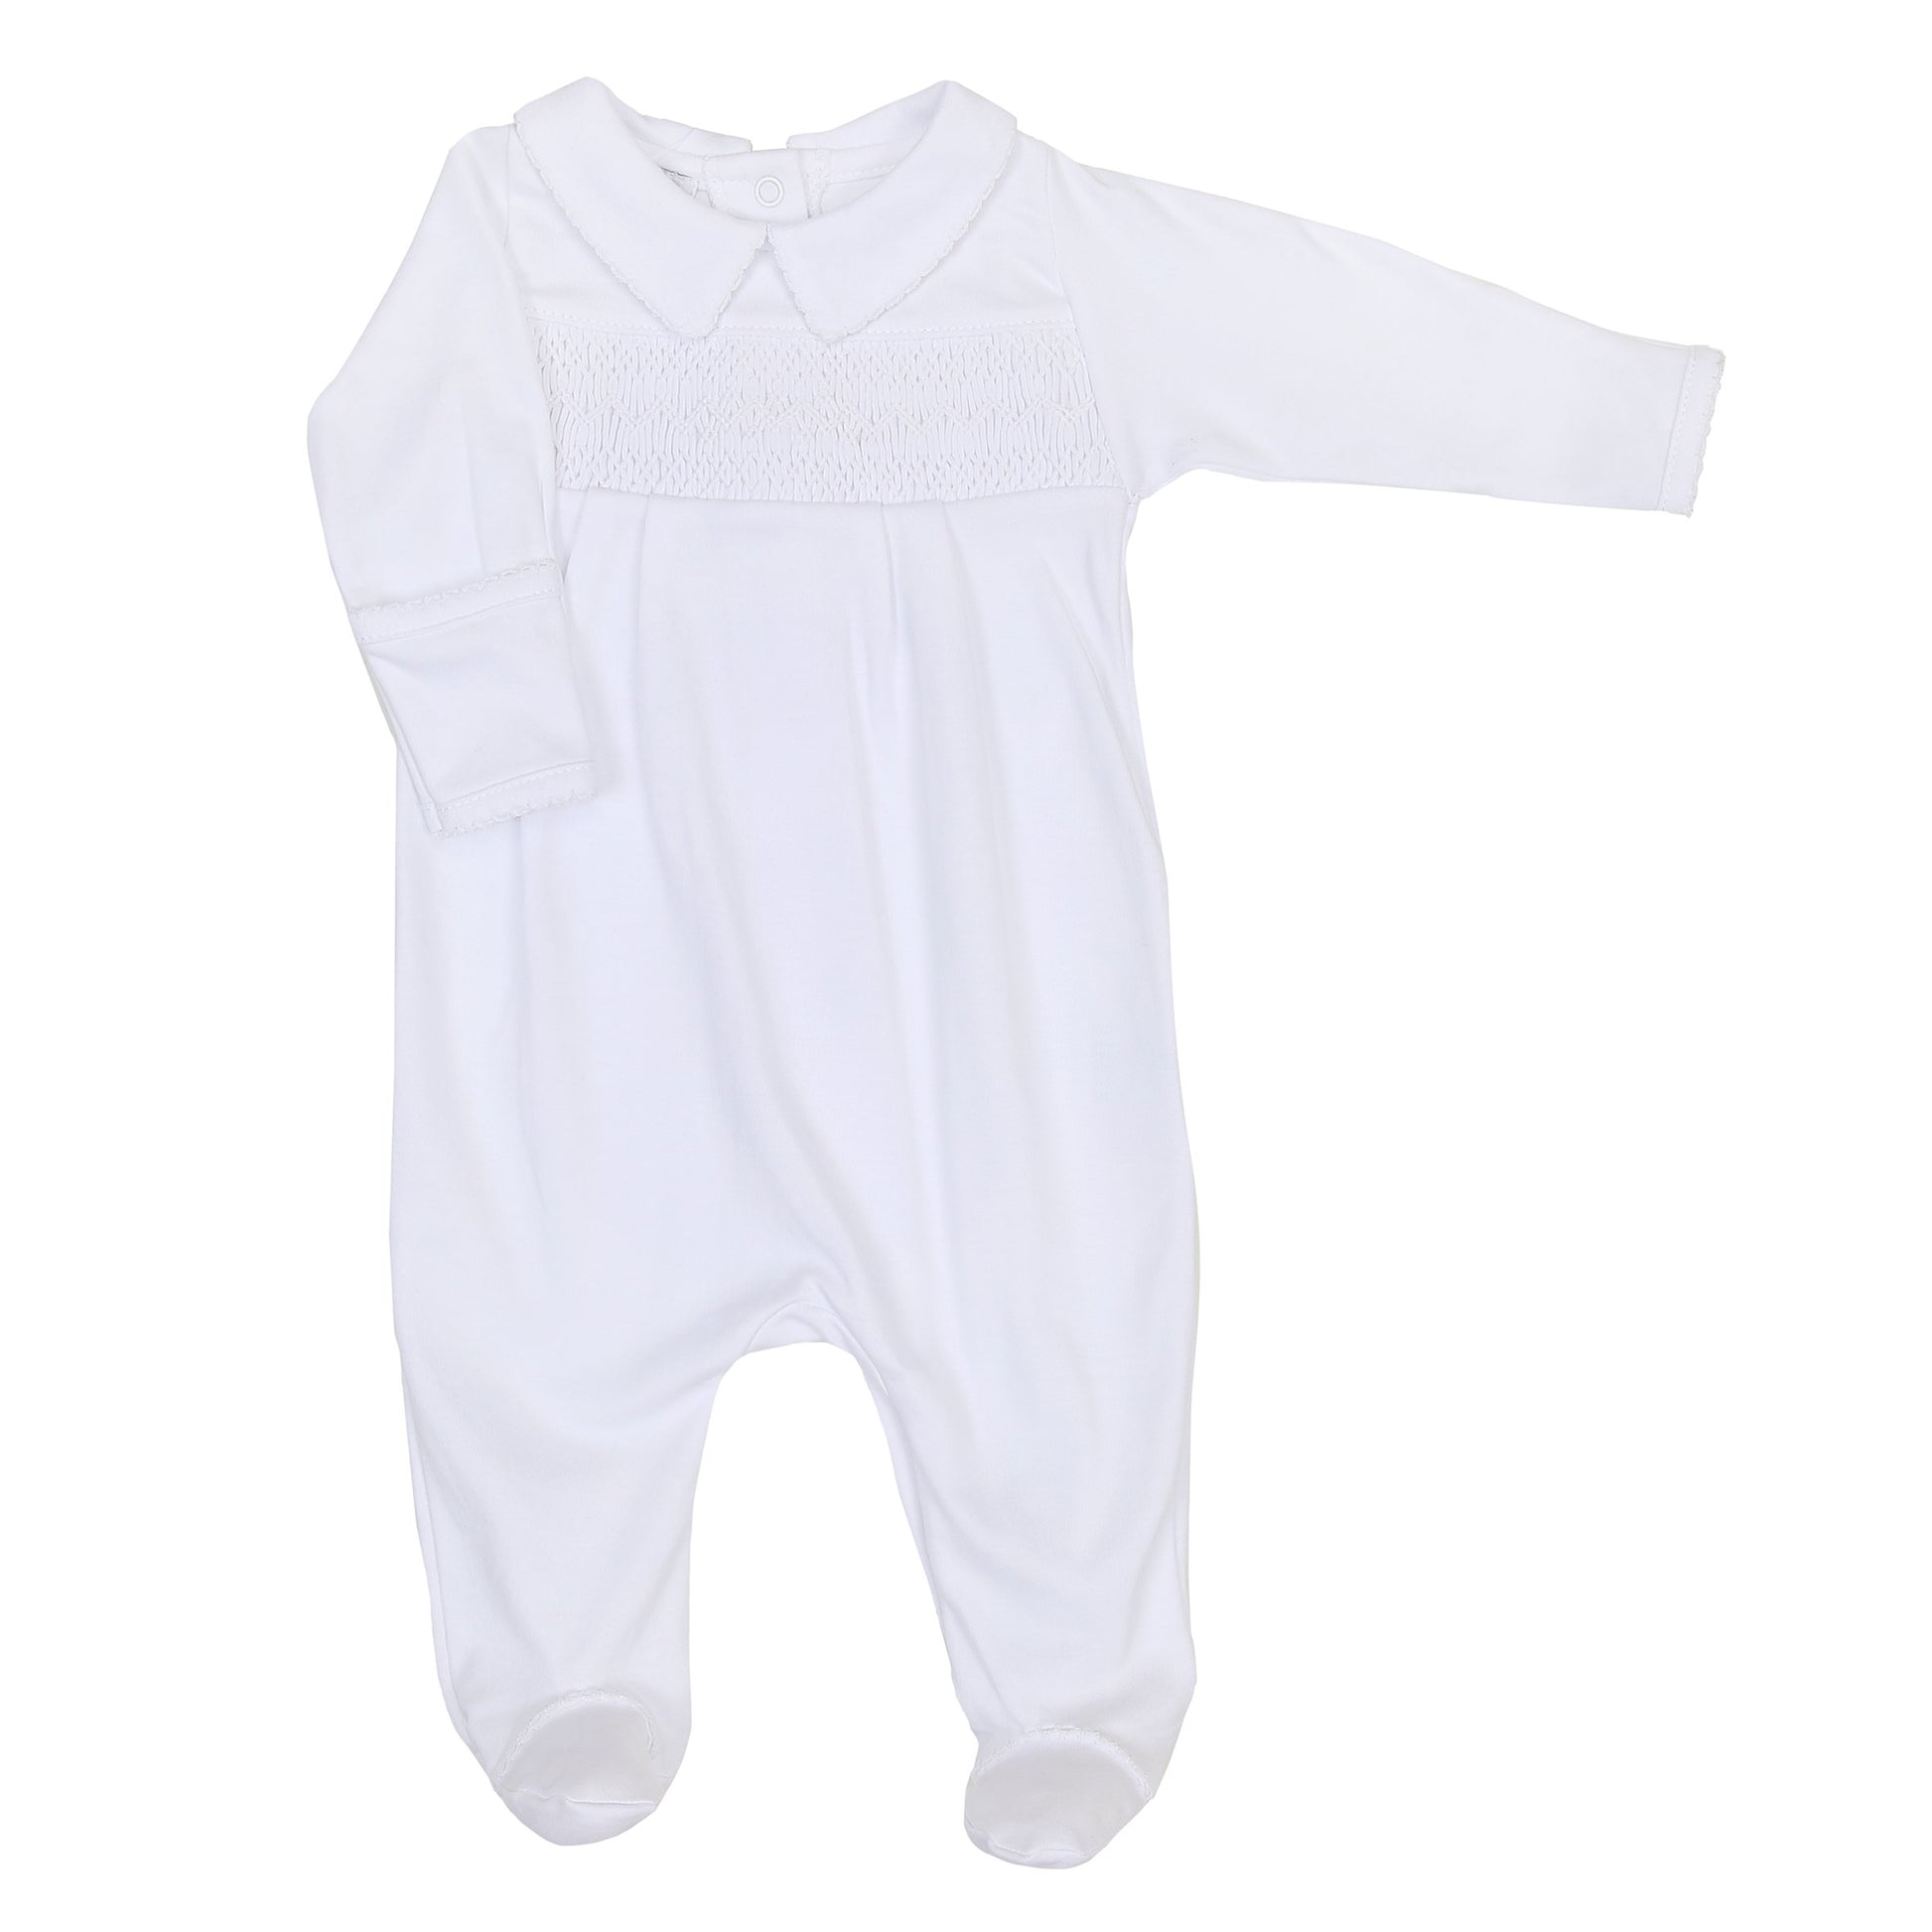 White and Ivory Smocked Collared Footie  - Doodlebug's Children's Boutique